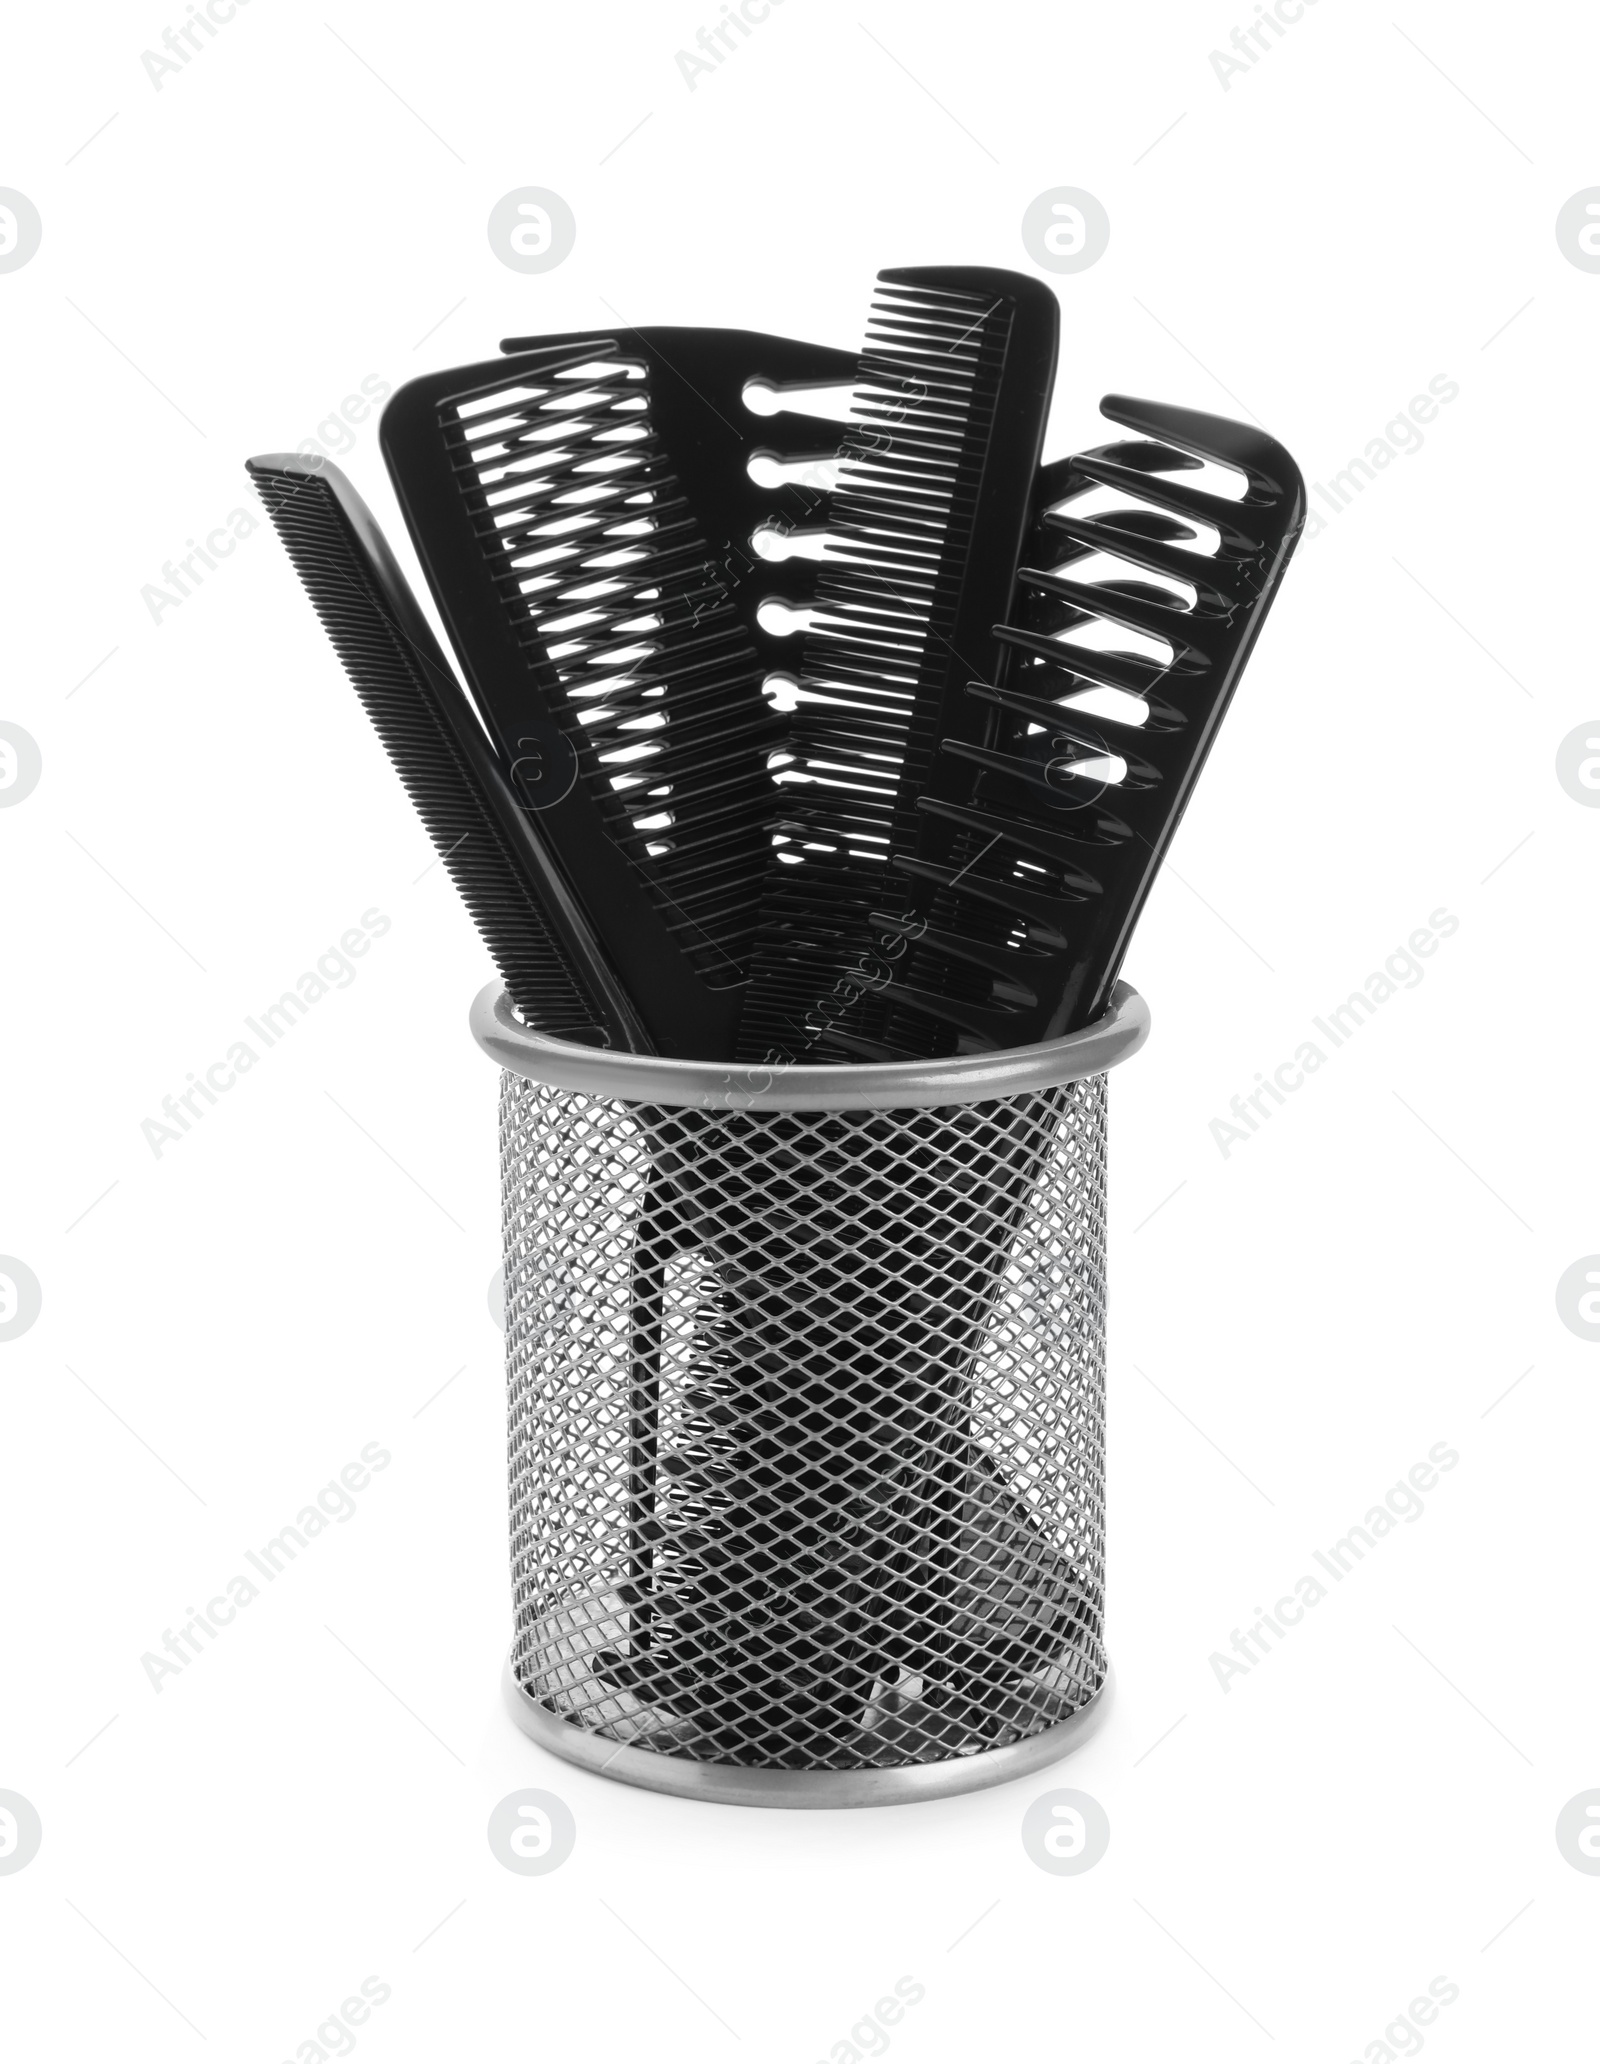 Photo of Set of professional hair combs in metal holder isolated on white